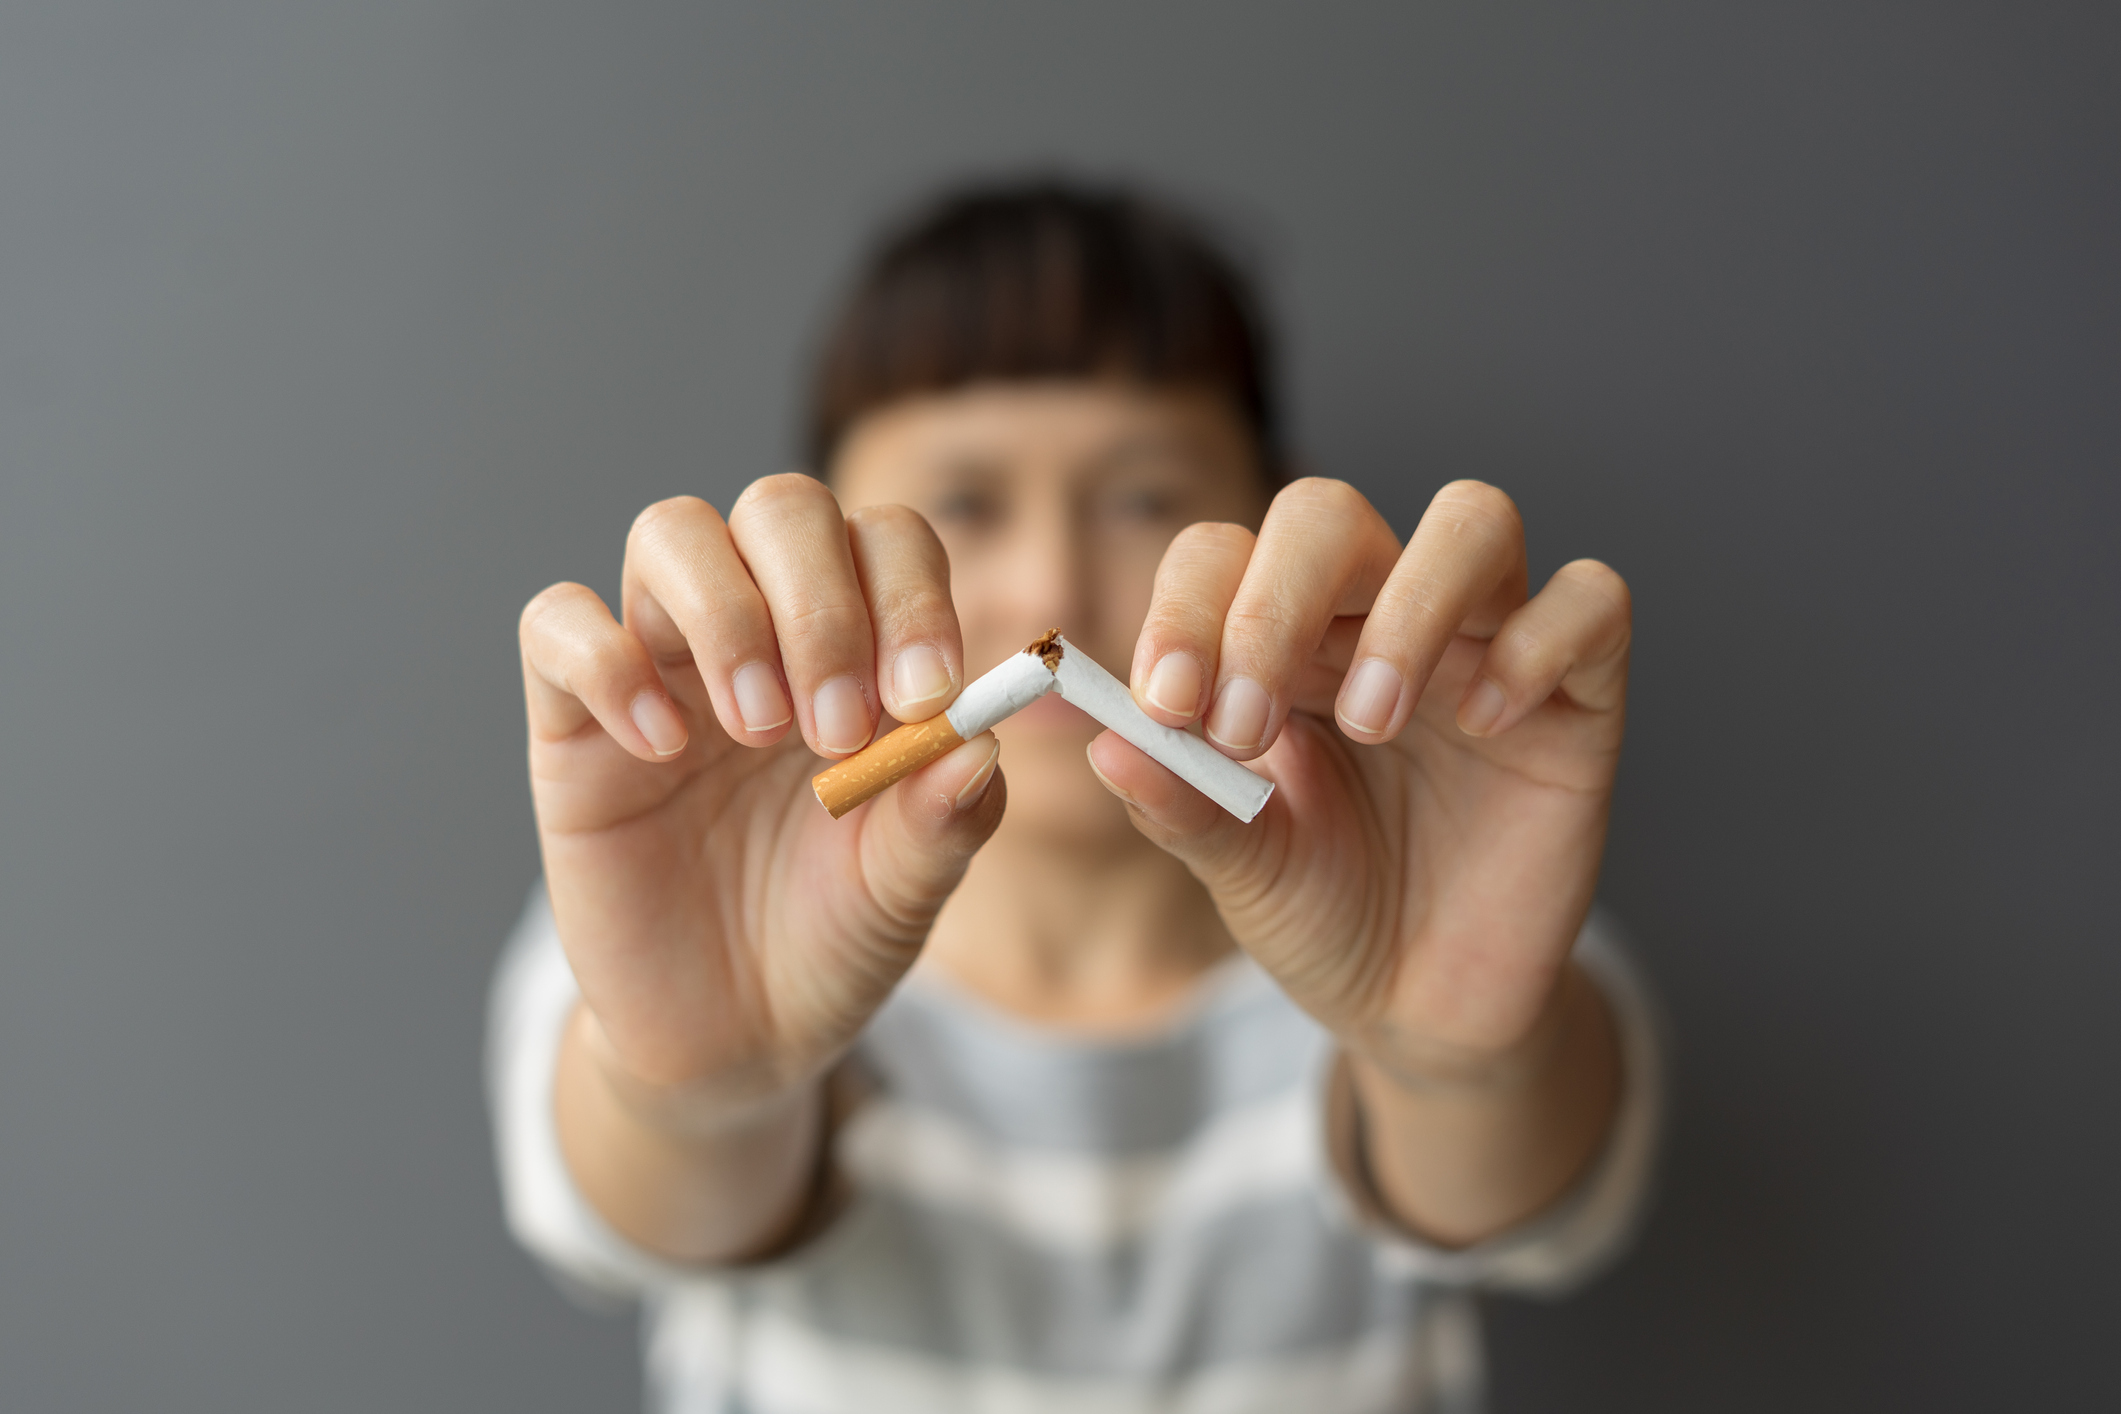 Tabac : comment nous rend-il accro ? - Doctissimo